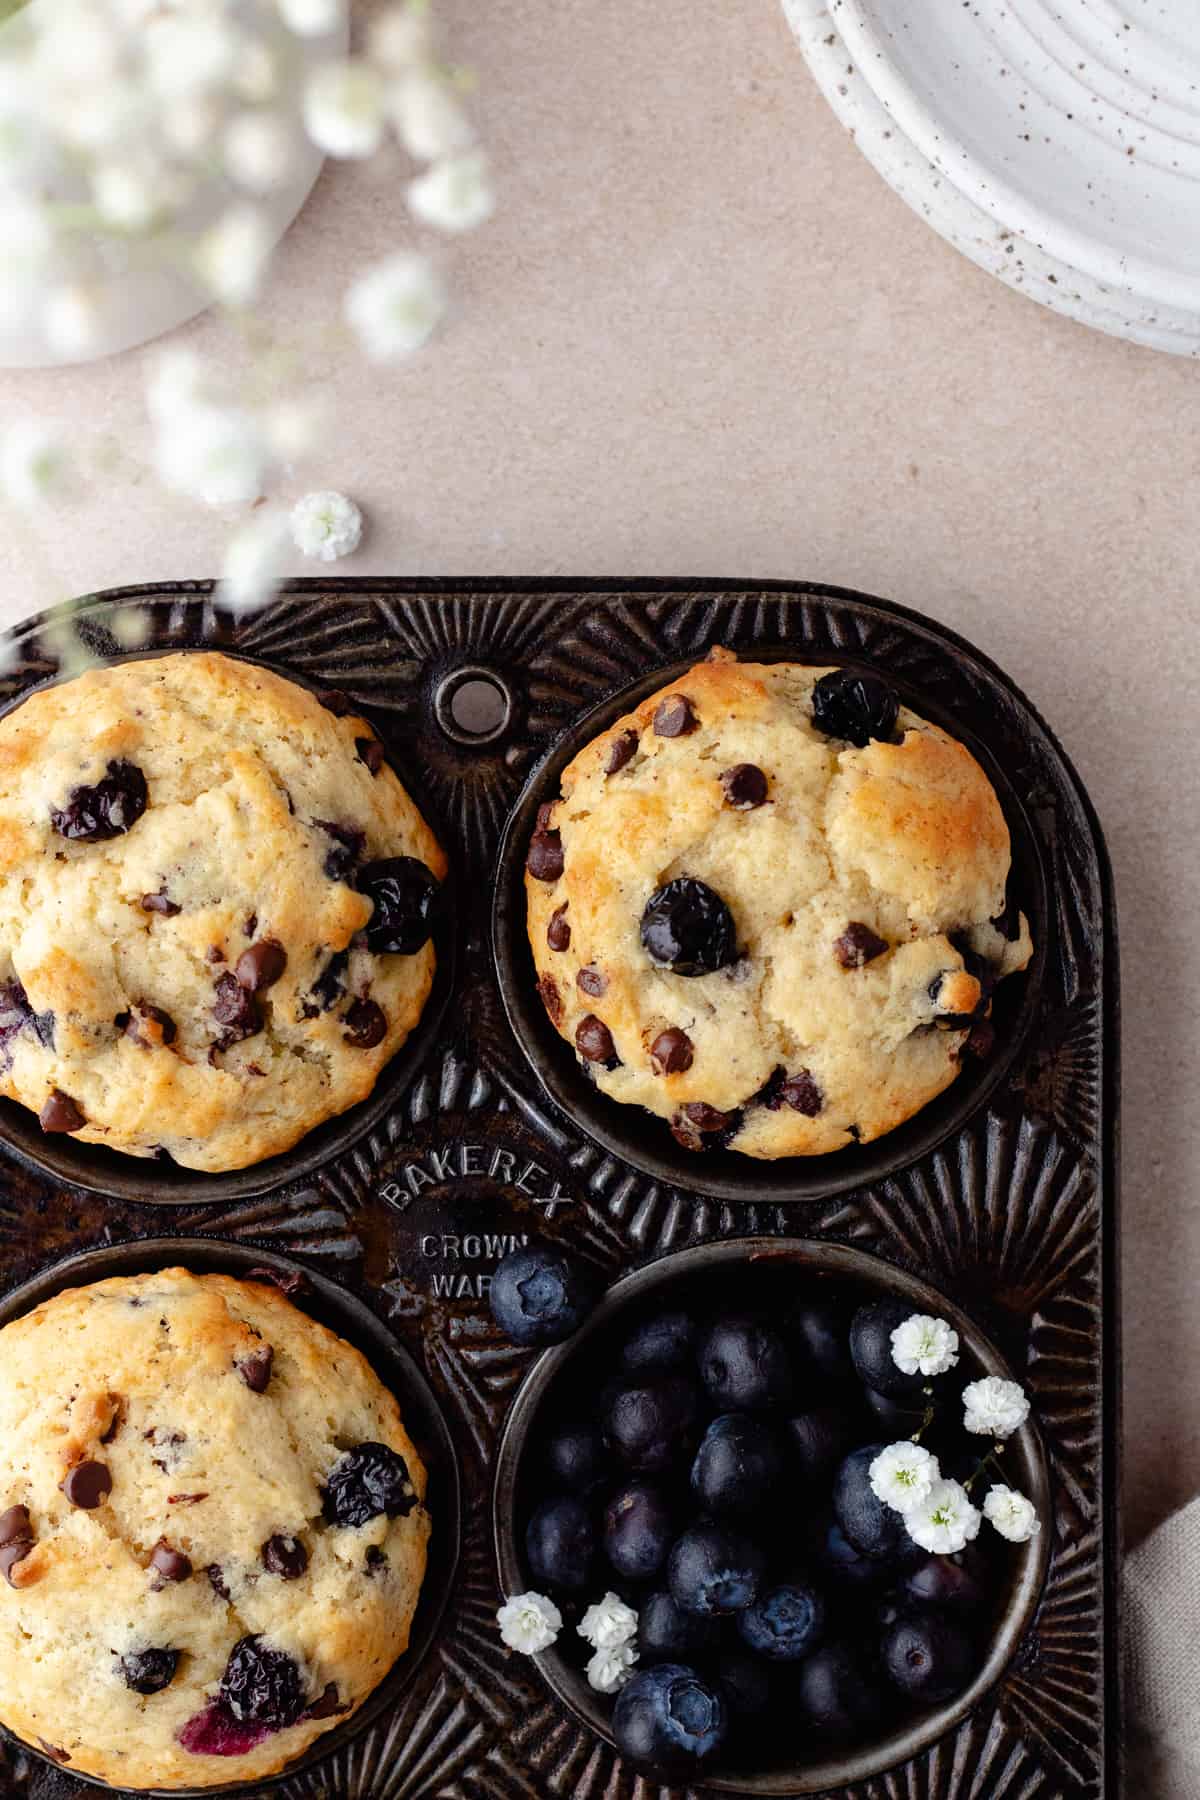 Blueberry chocolate chip muffins